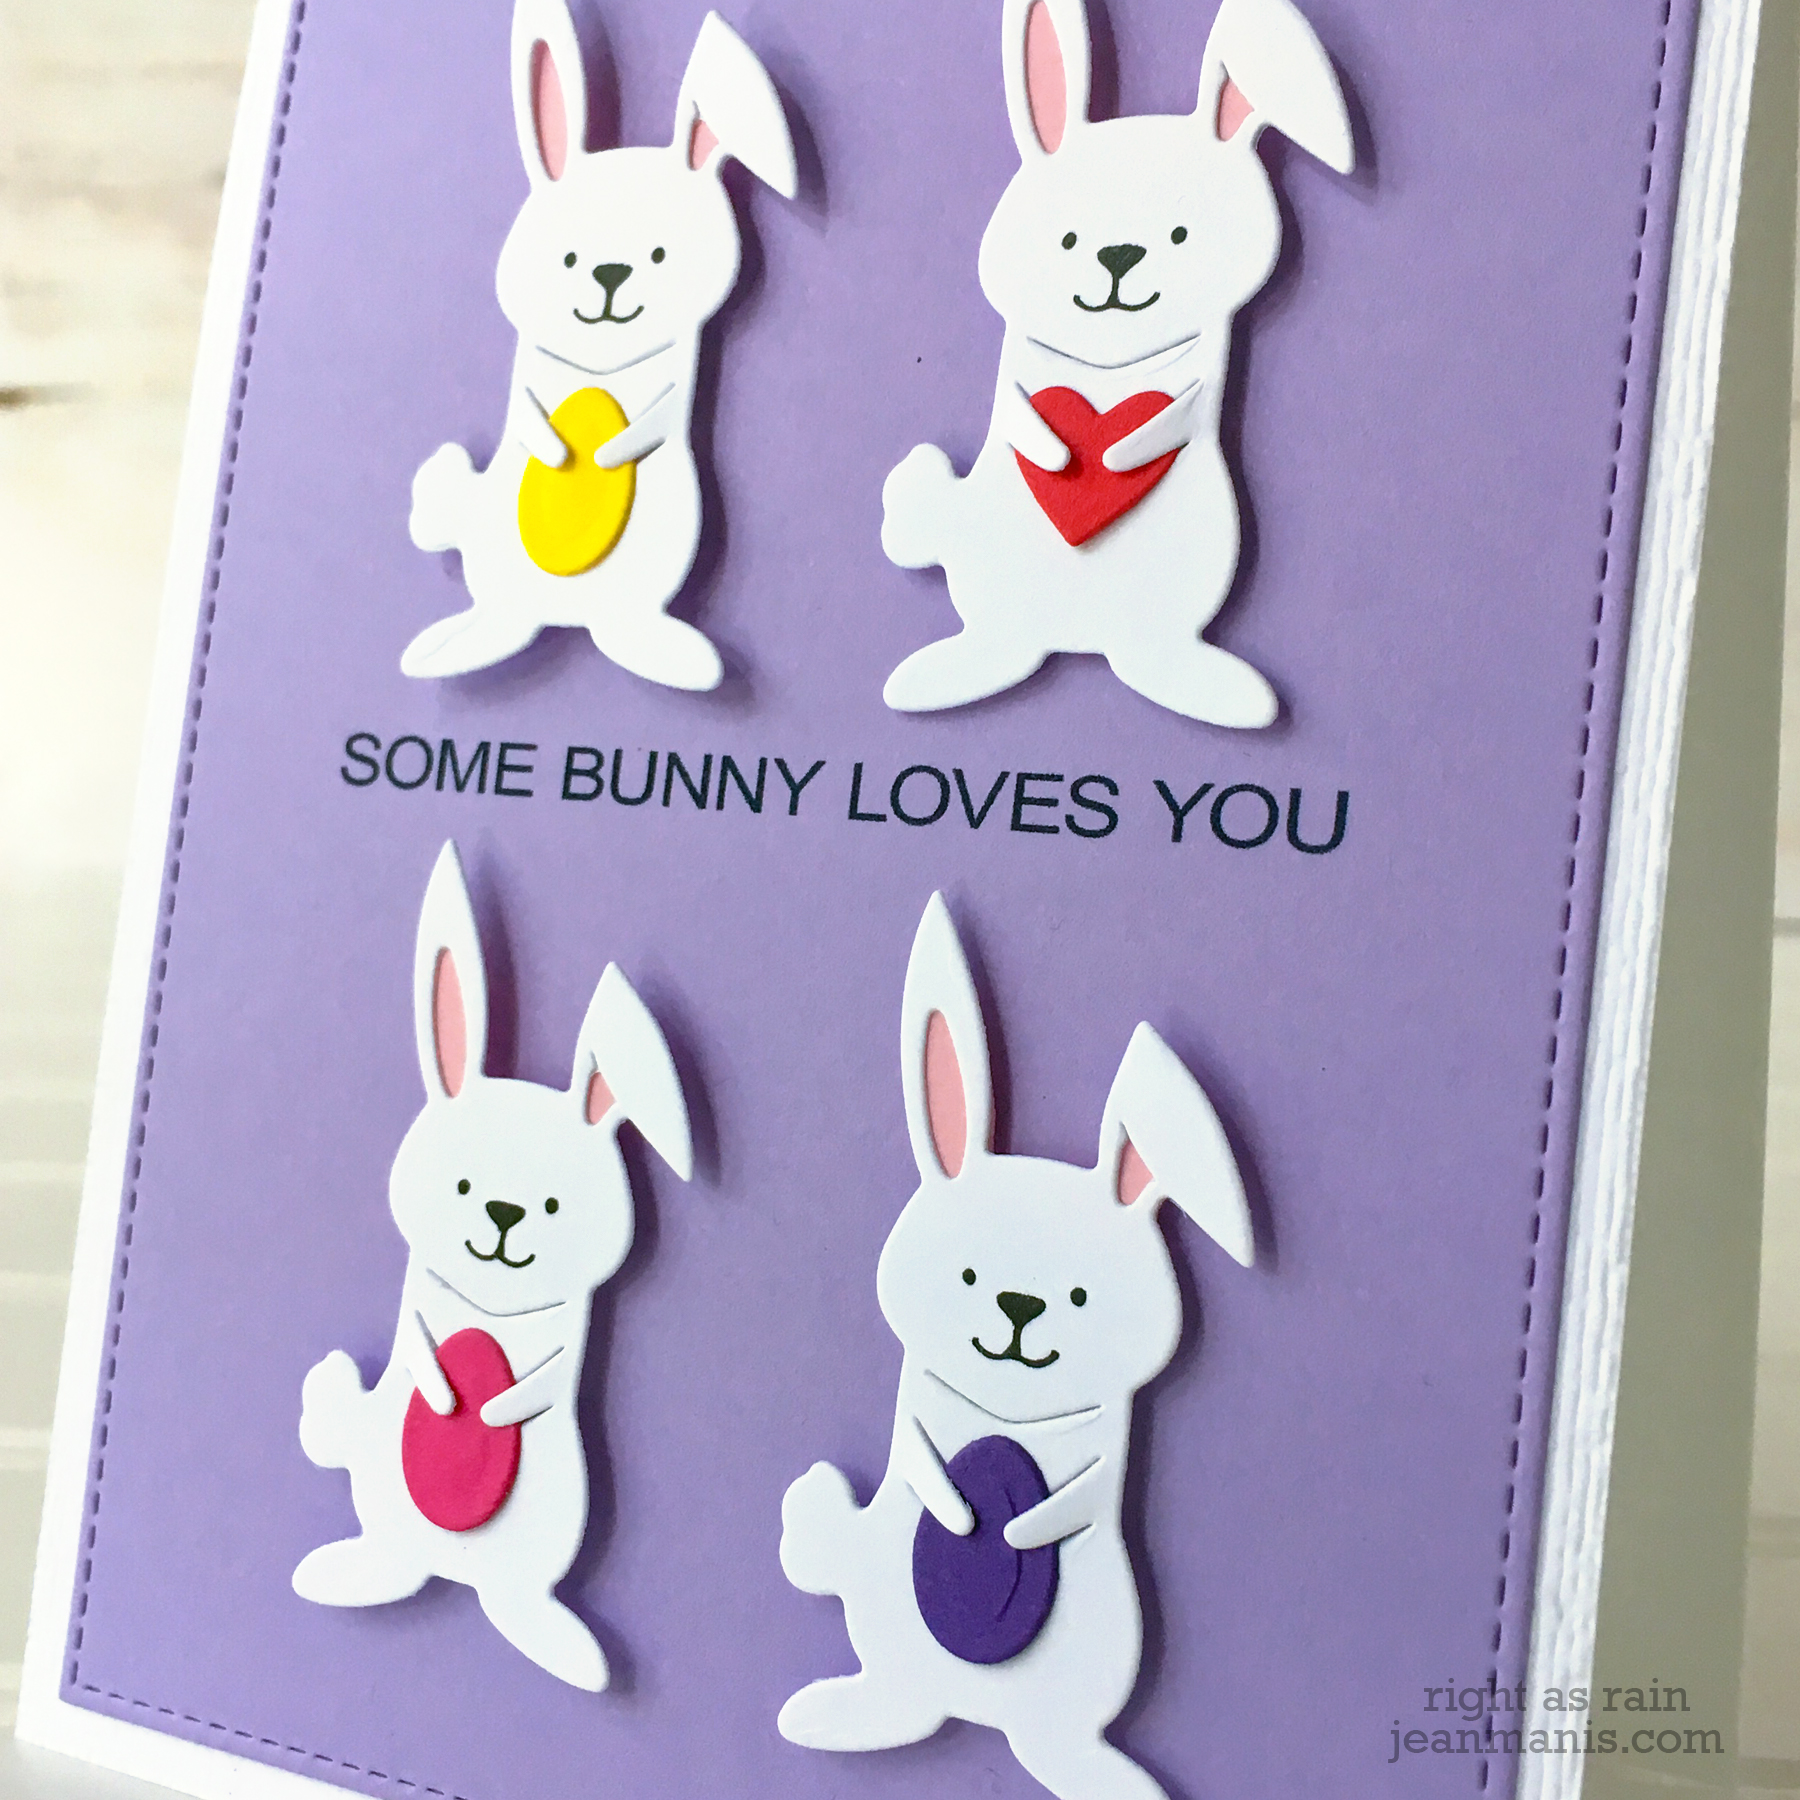 Some Bunny Loves You - Die-cut Easter Card